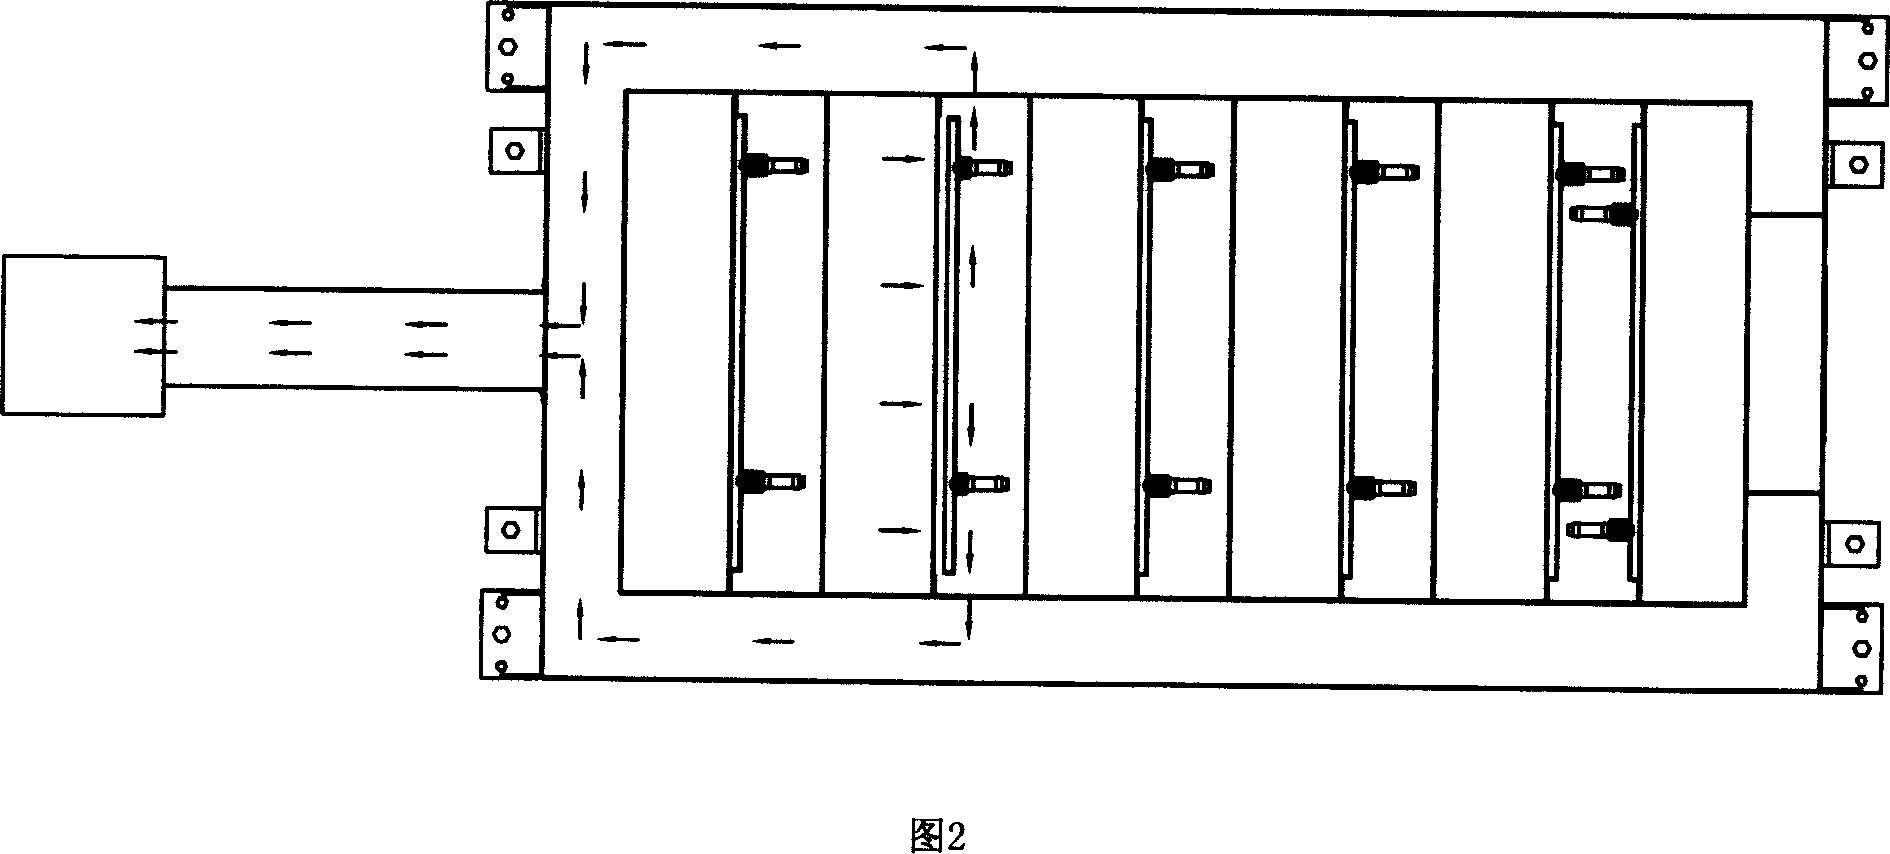 Dust cleaning apparatus of laser cutting machine tool